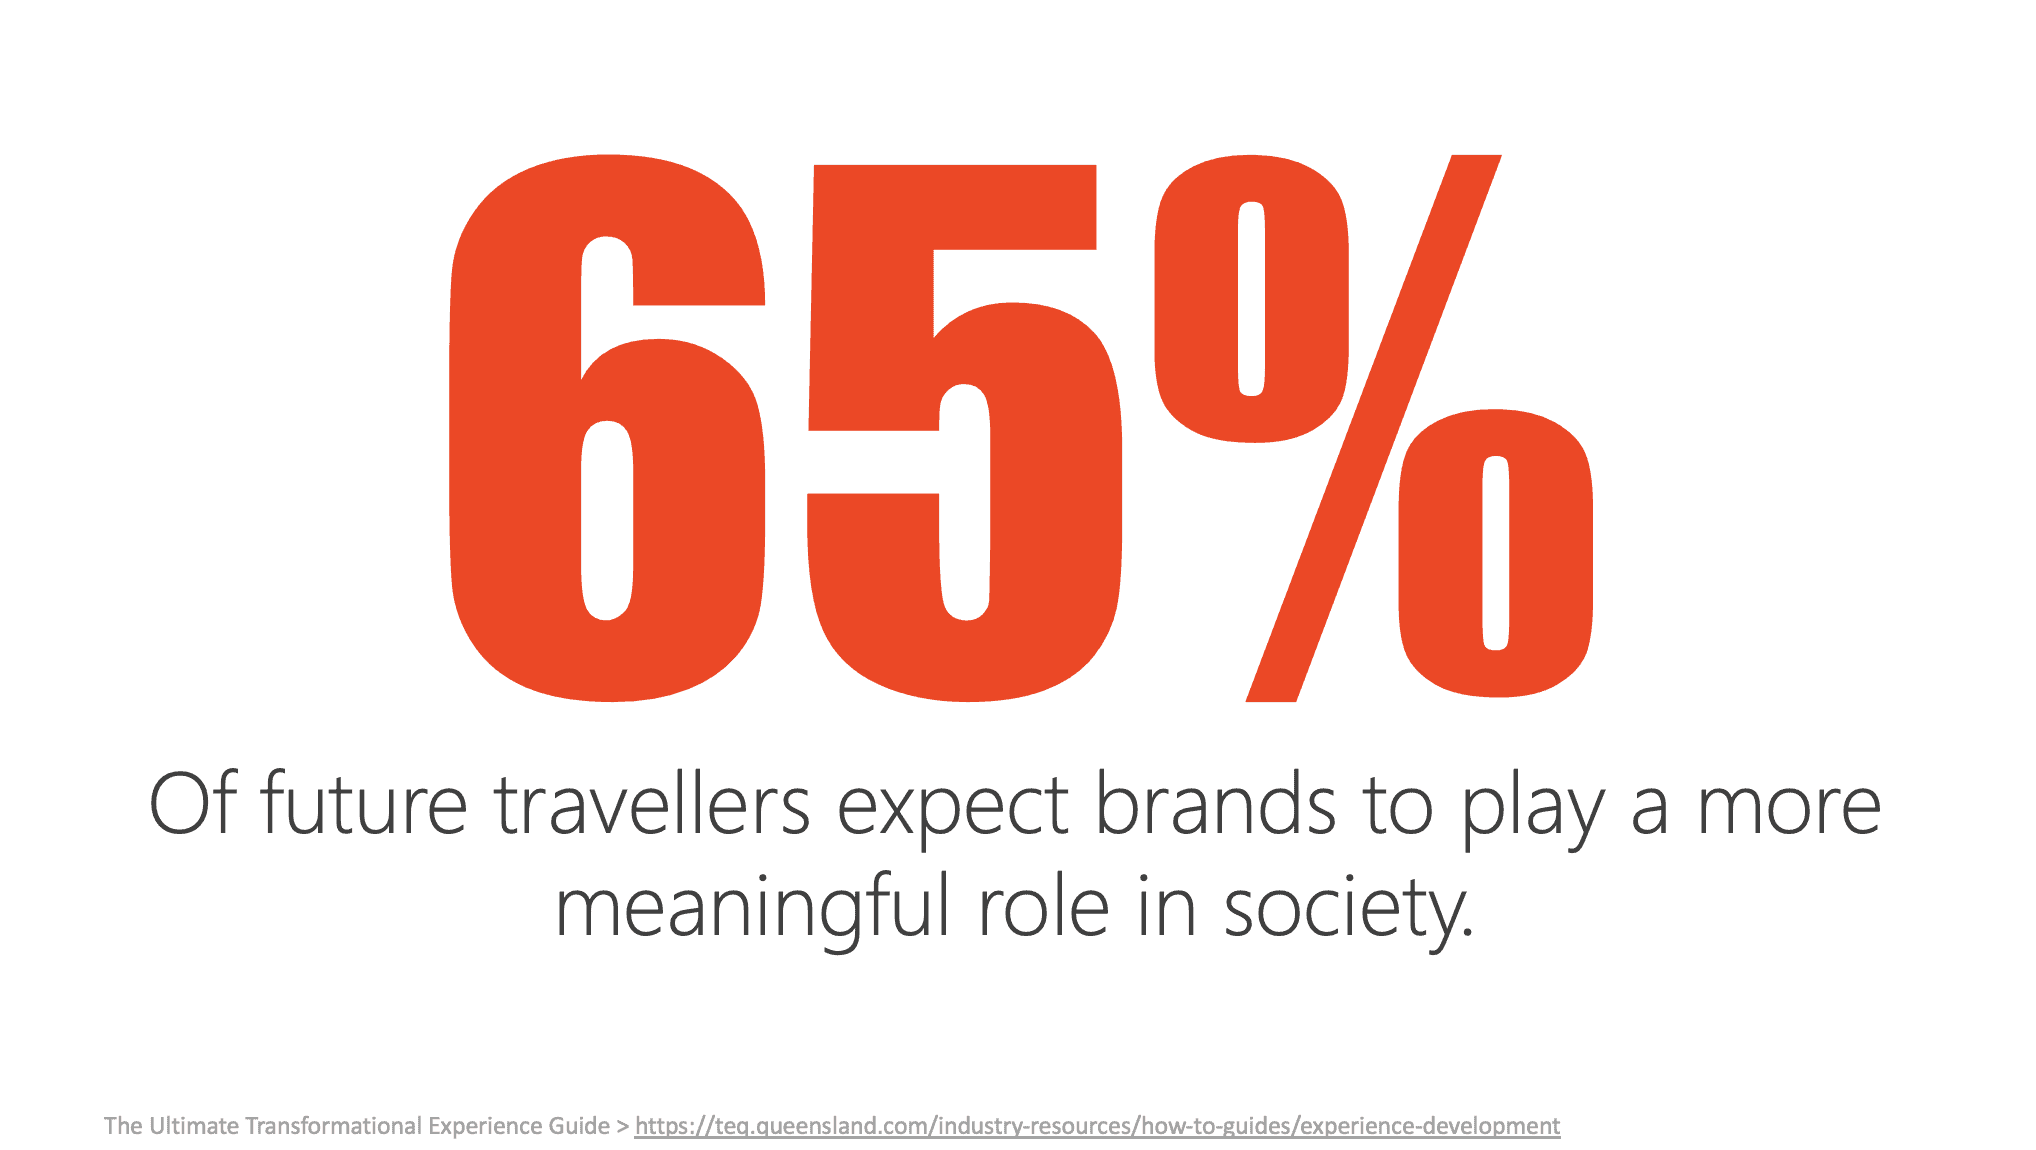 65 percent of travellers expect brands to play a meaningful role